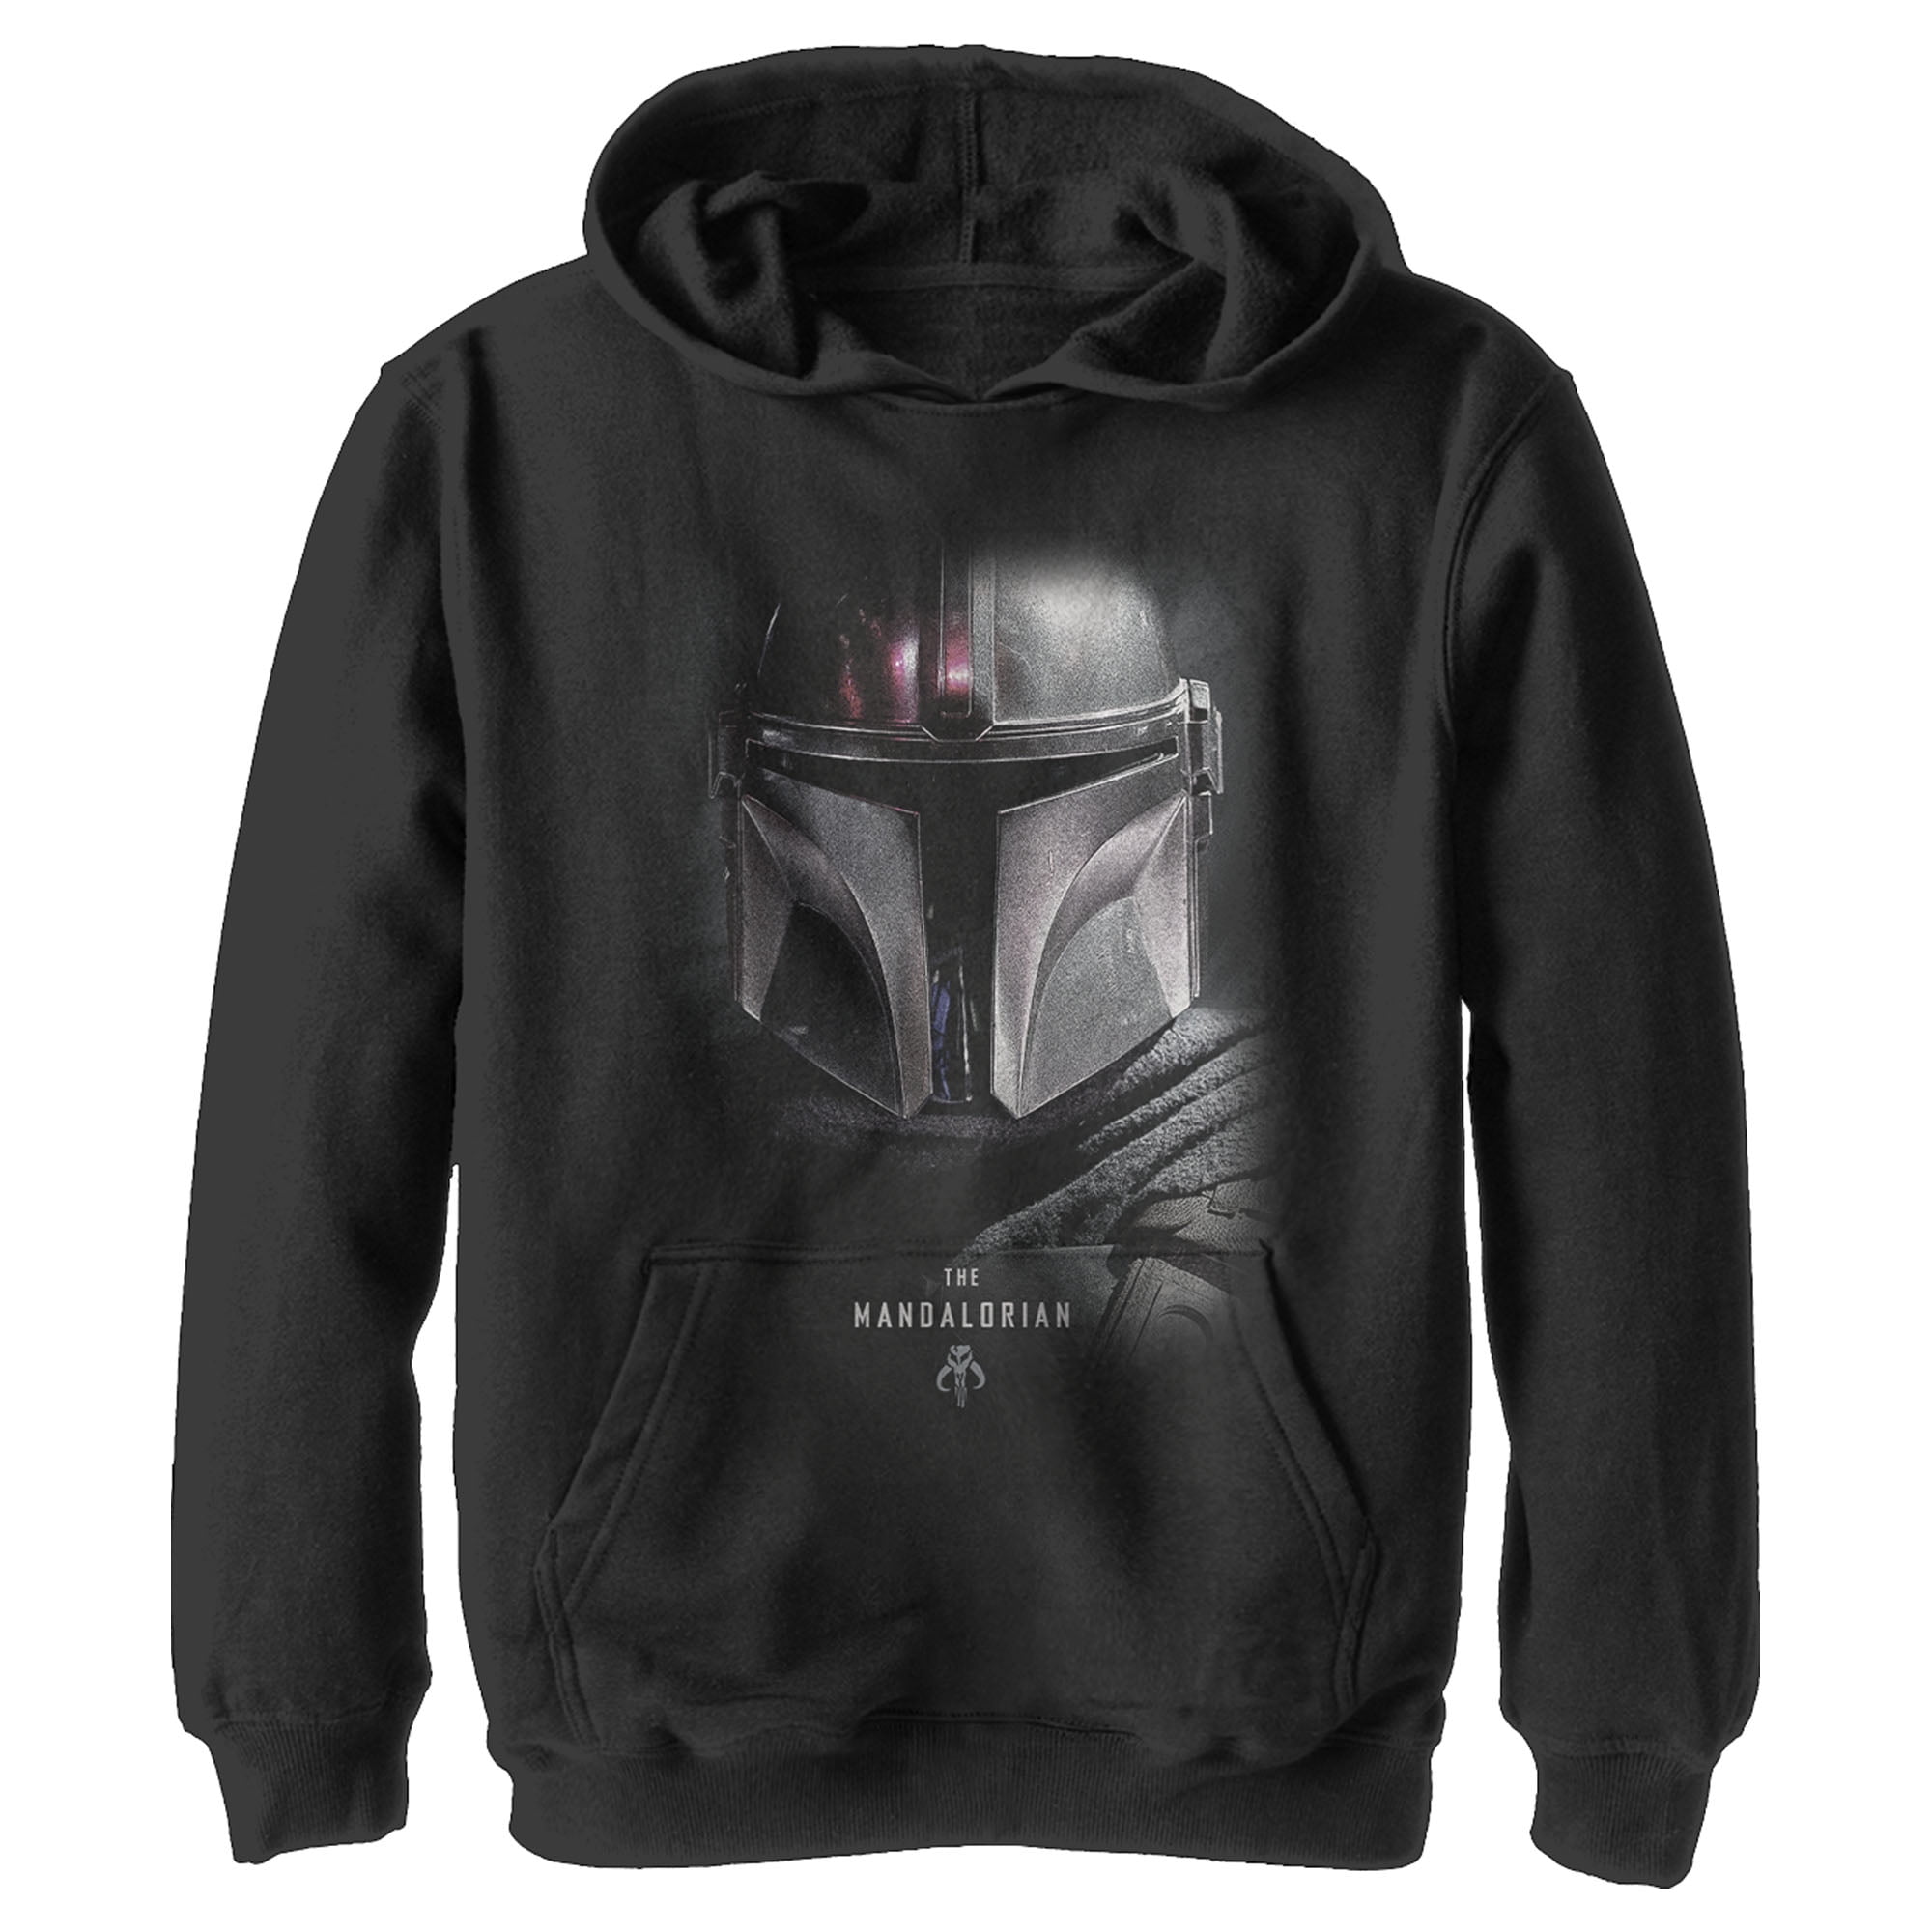 Star Wars Gifts The Mandalorian Hoodies for Boys